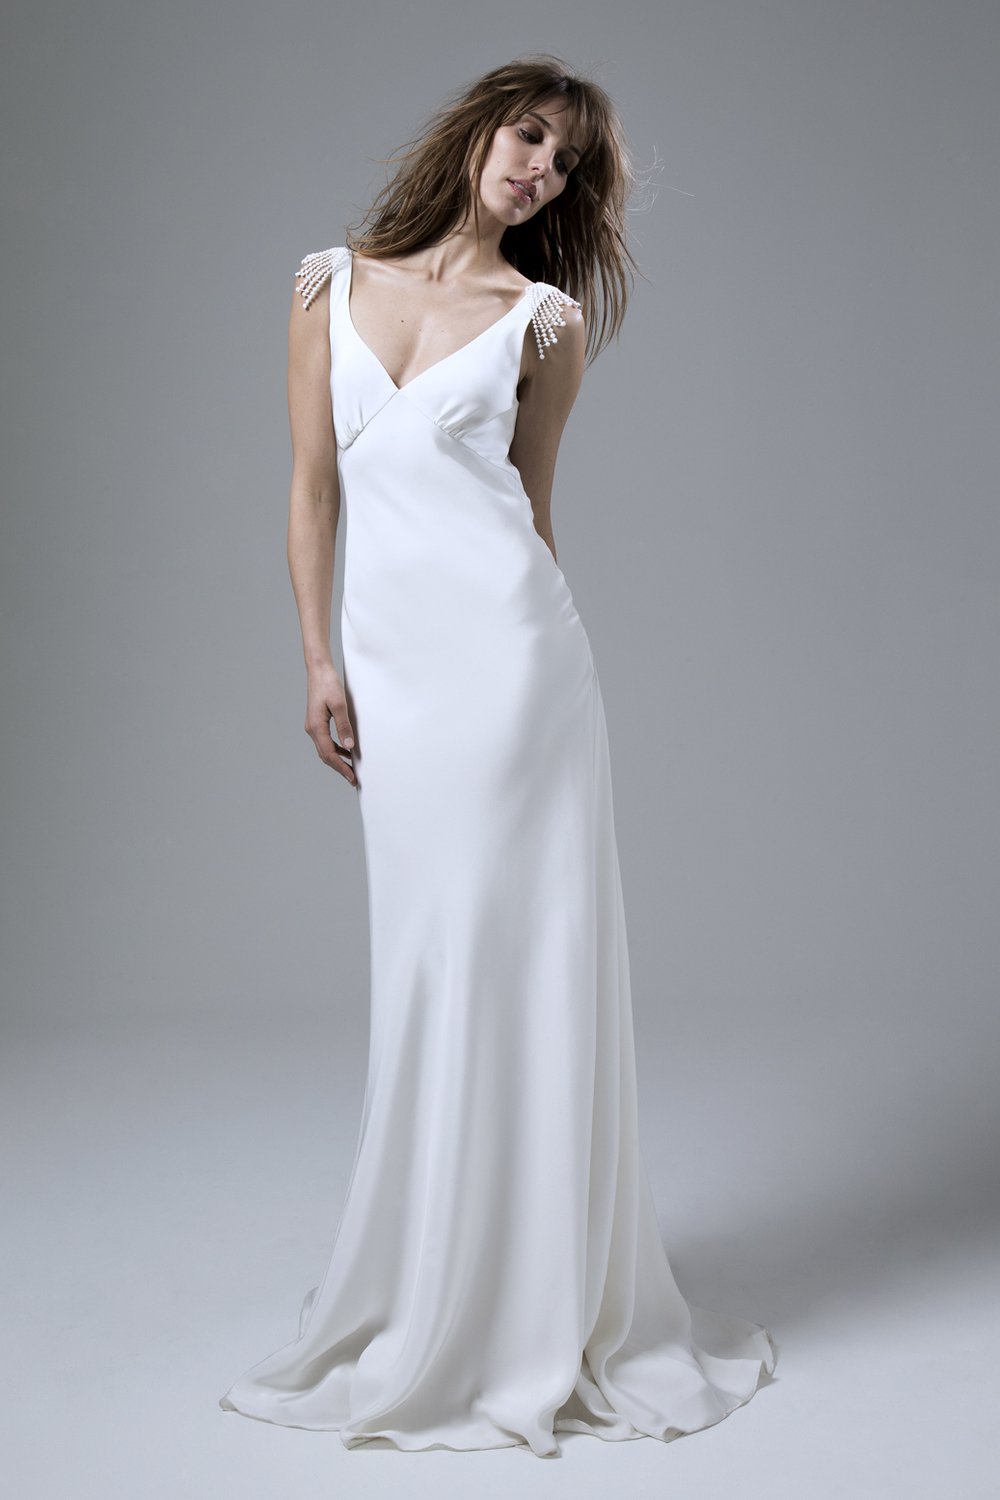 Flora Romance — Halfpenny London Wedding dresses and separates in London